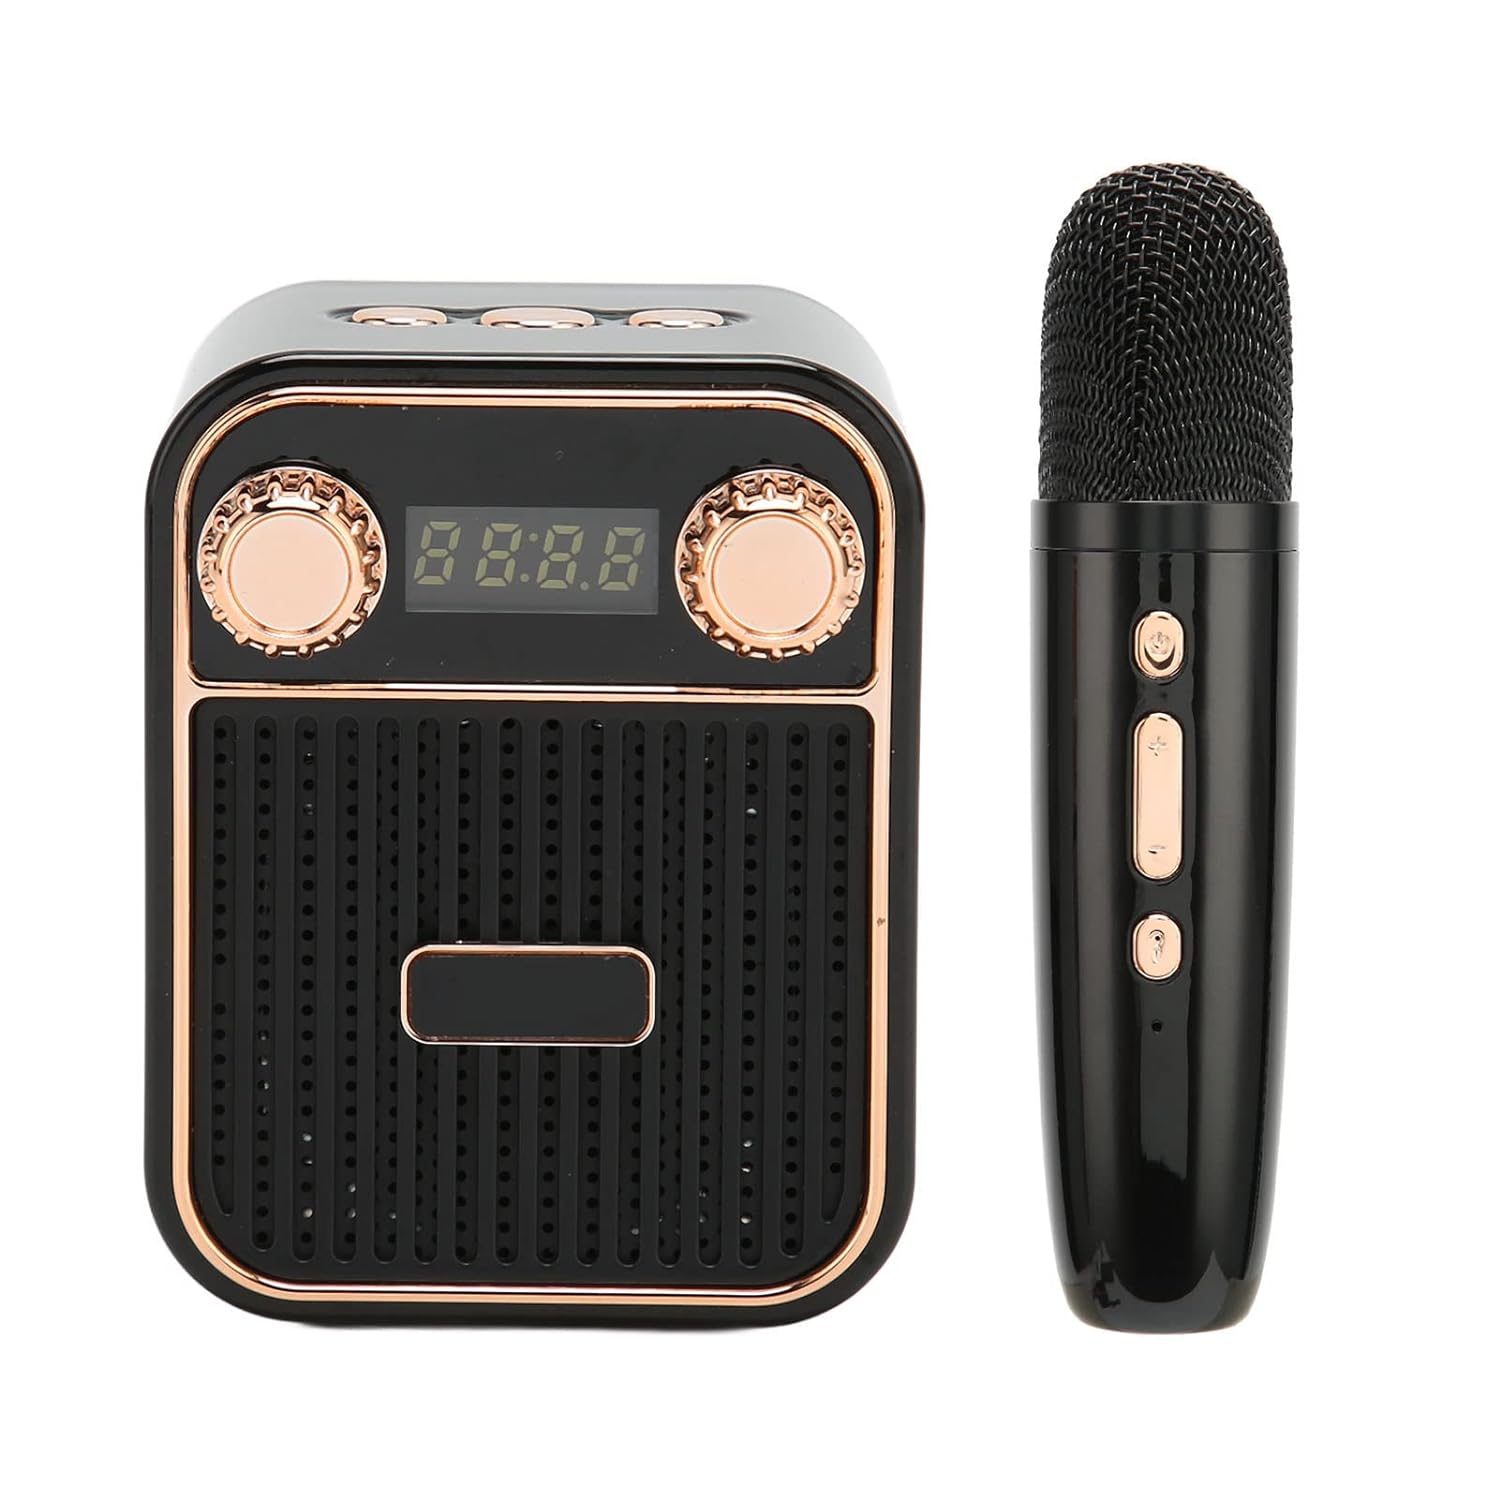 Cuifati Karaoke Machine for Kids, Portable Bluetooth Speaker with Hi-Fi Stereo Sound with Microphone, Bluetooth Card Headphones, Three Modes (Black)